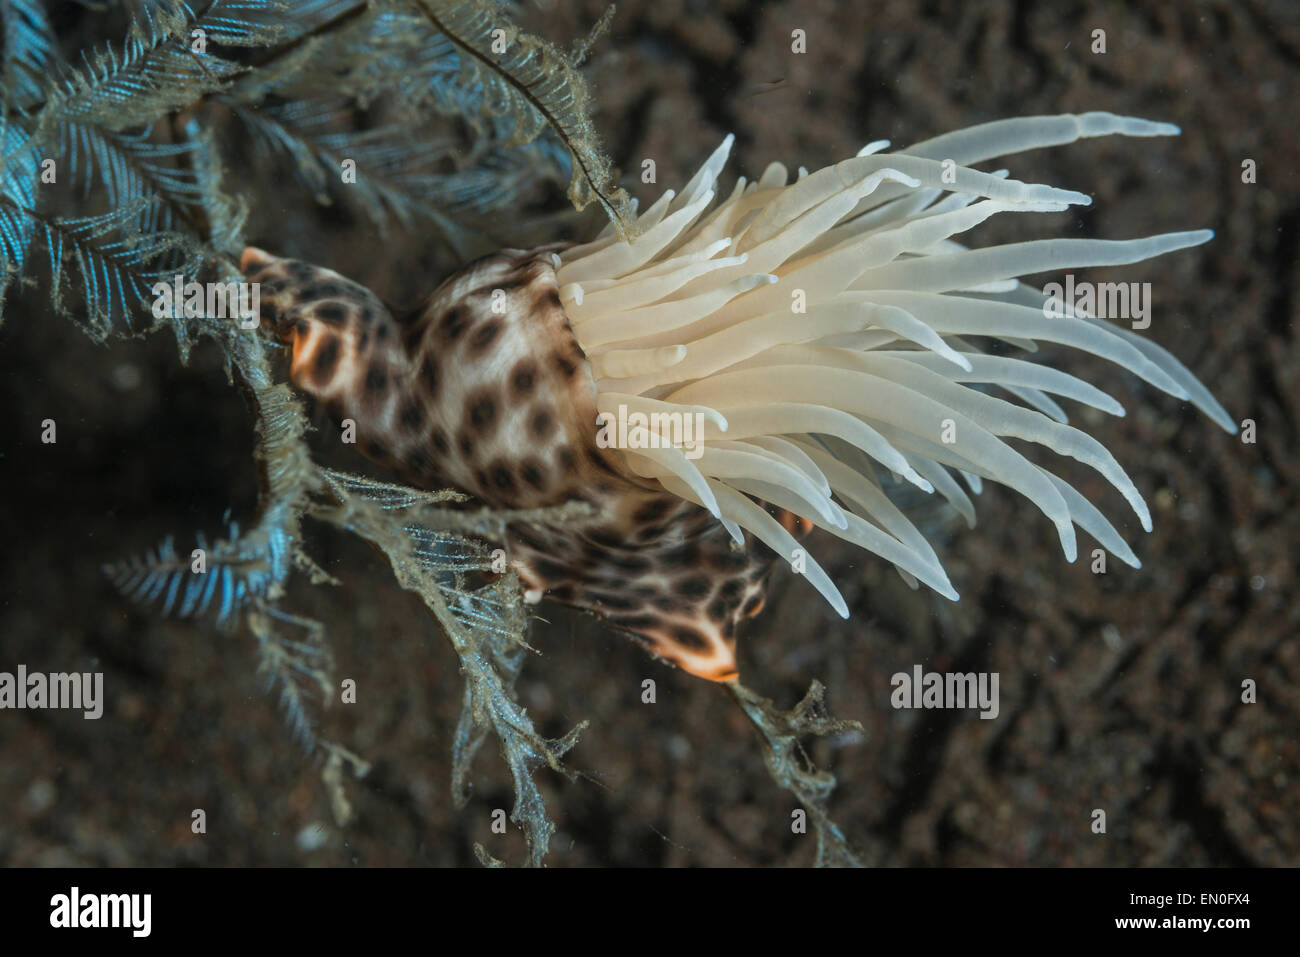 Colonizing anemone on a coral branch Stock Photo